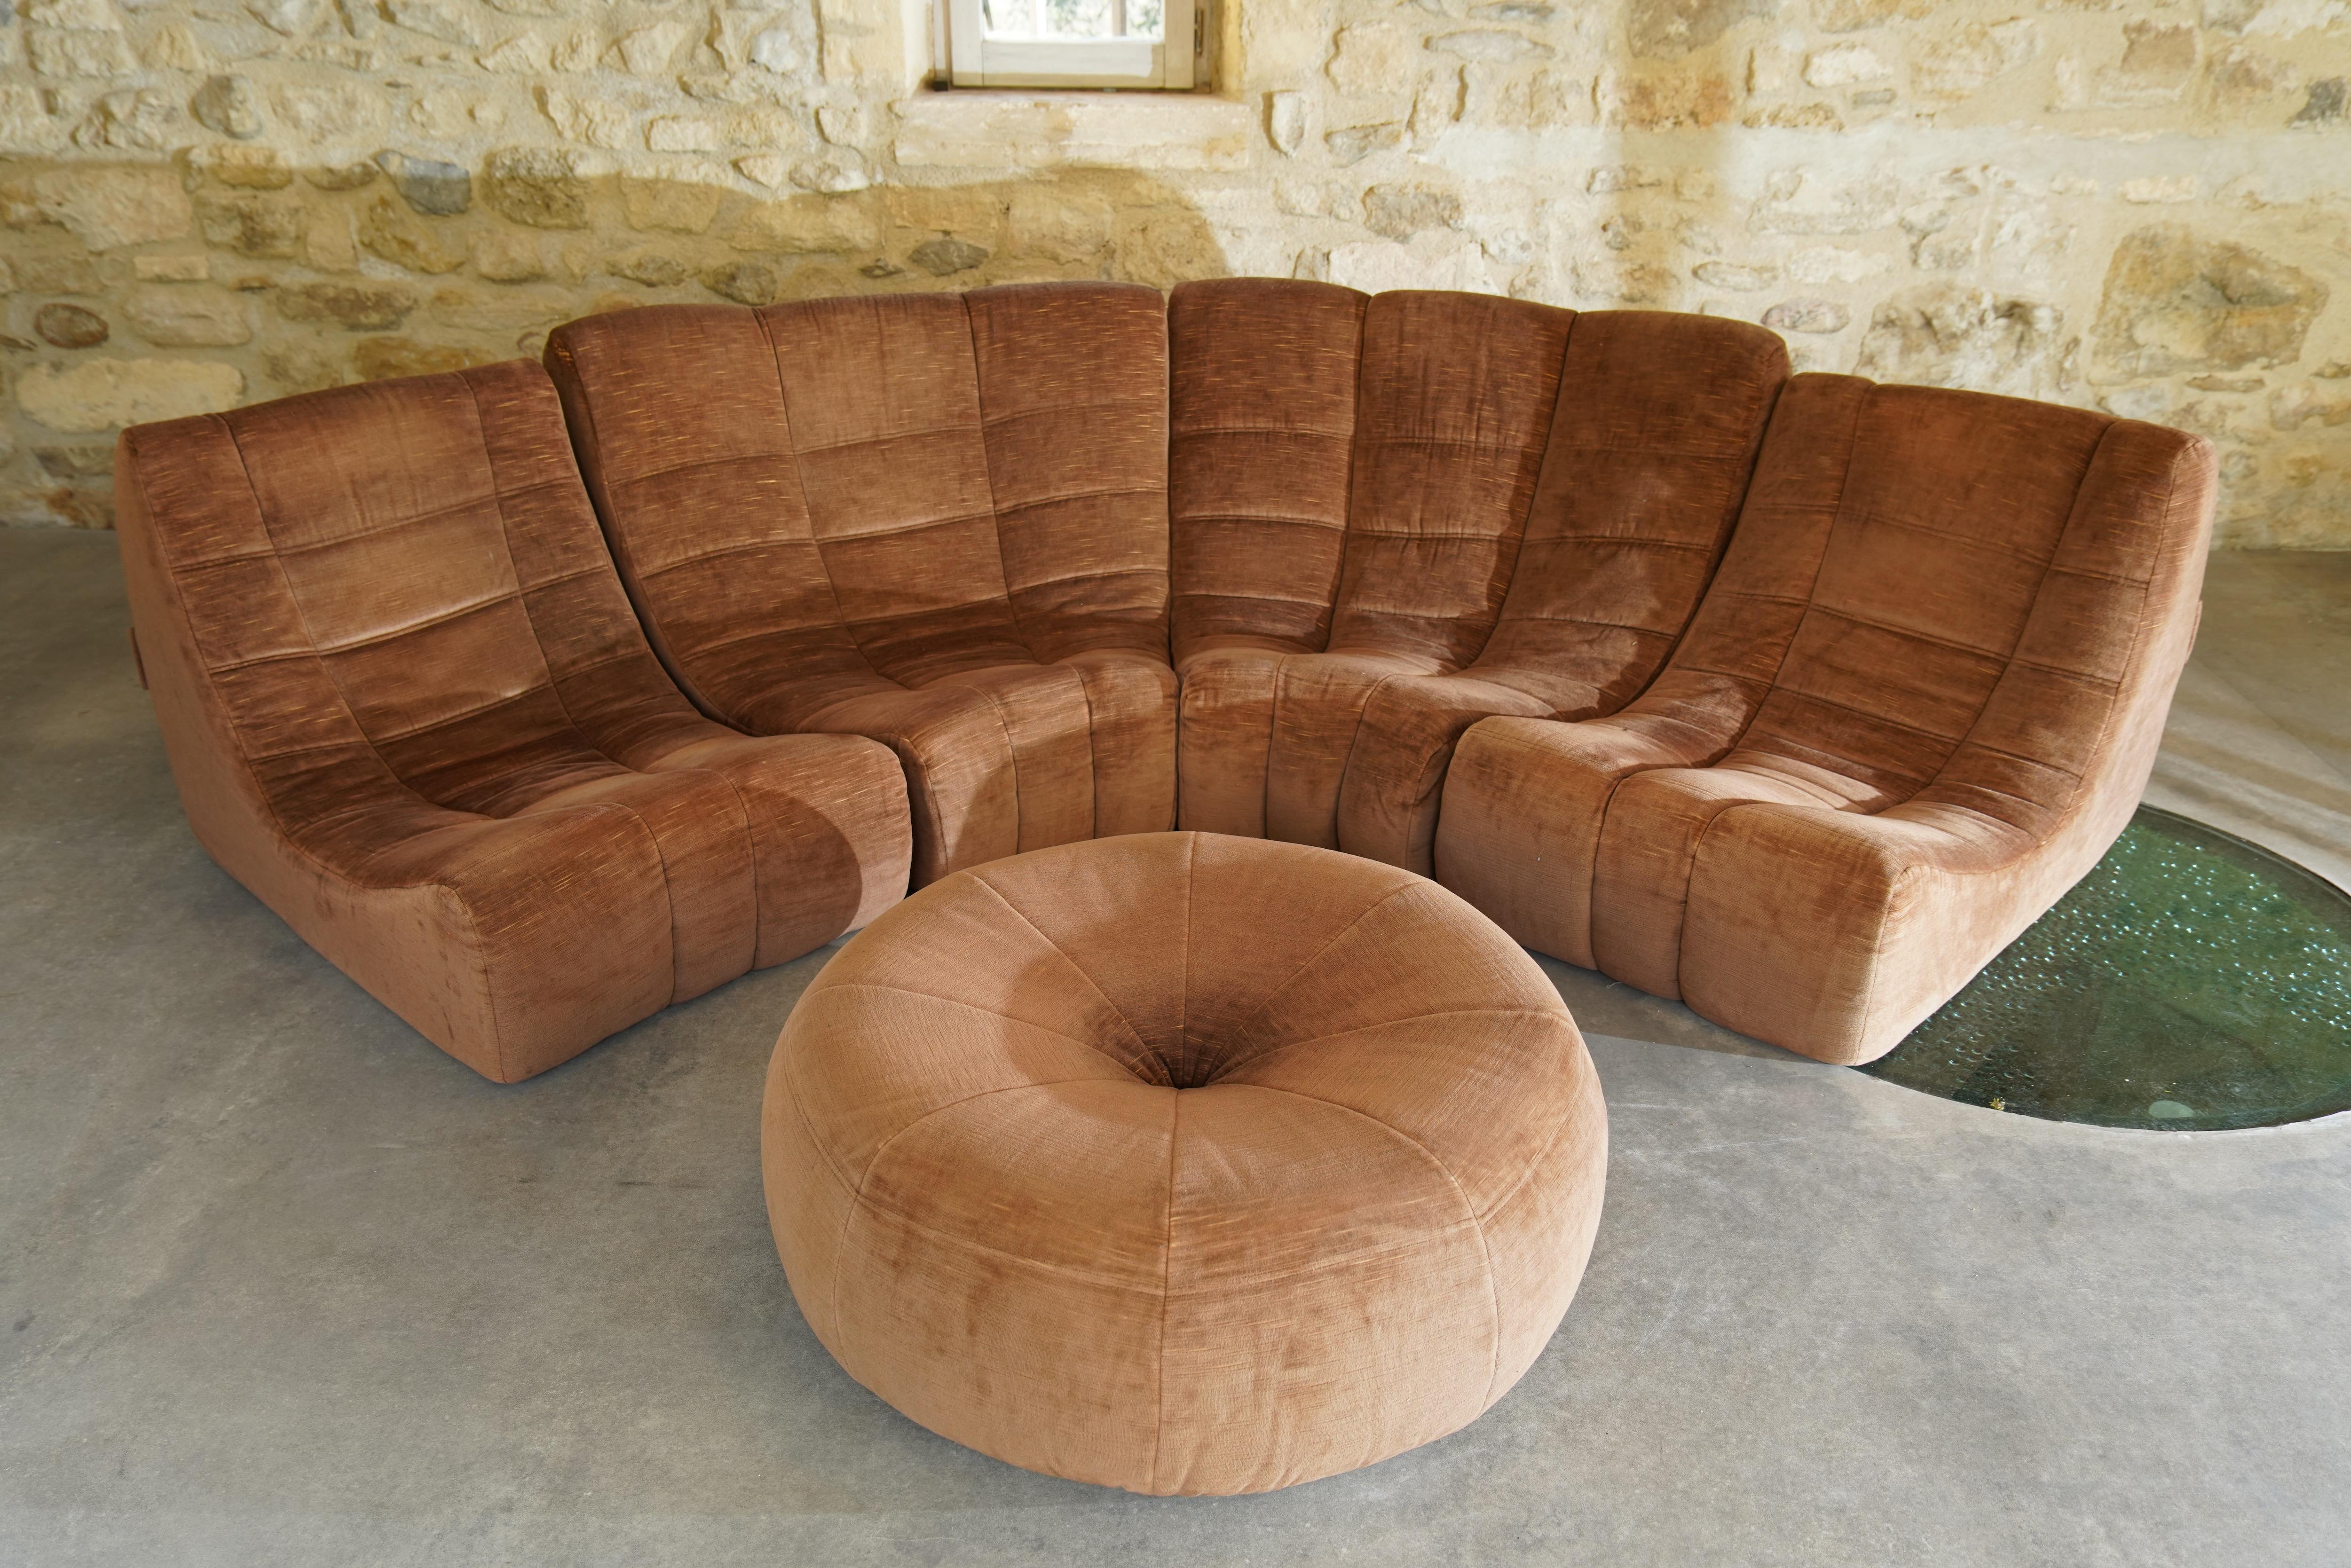 Rare 'Gilda' sofa and ottoman designed by Michel Ducaroy for Ligne Roset in brown velvet. Set features 4 interconnecting chairs and 1 rarely seen ottoman in matching fabric.

The Gilda sofa, composed of comfortable curved modules, is a rare sibling